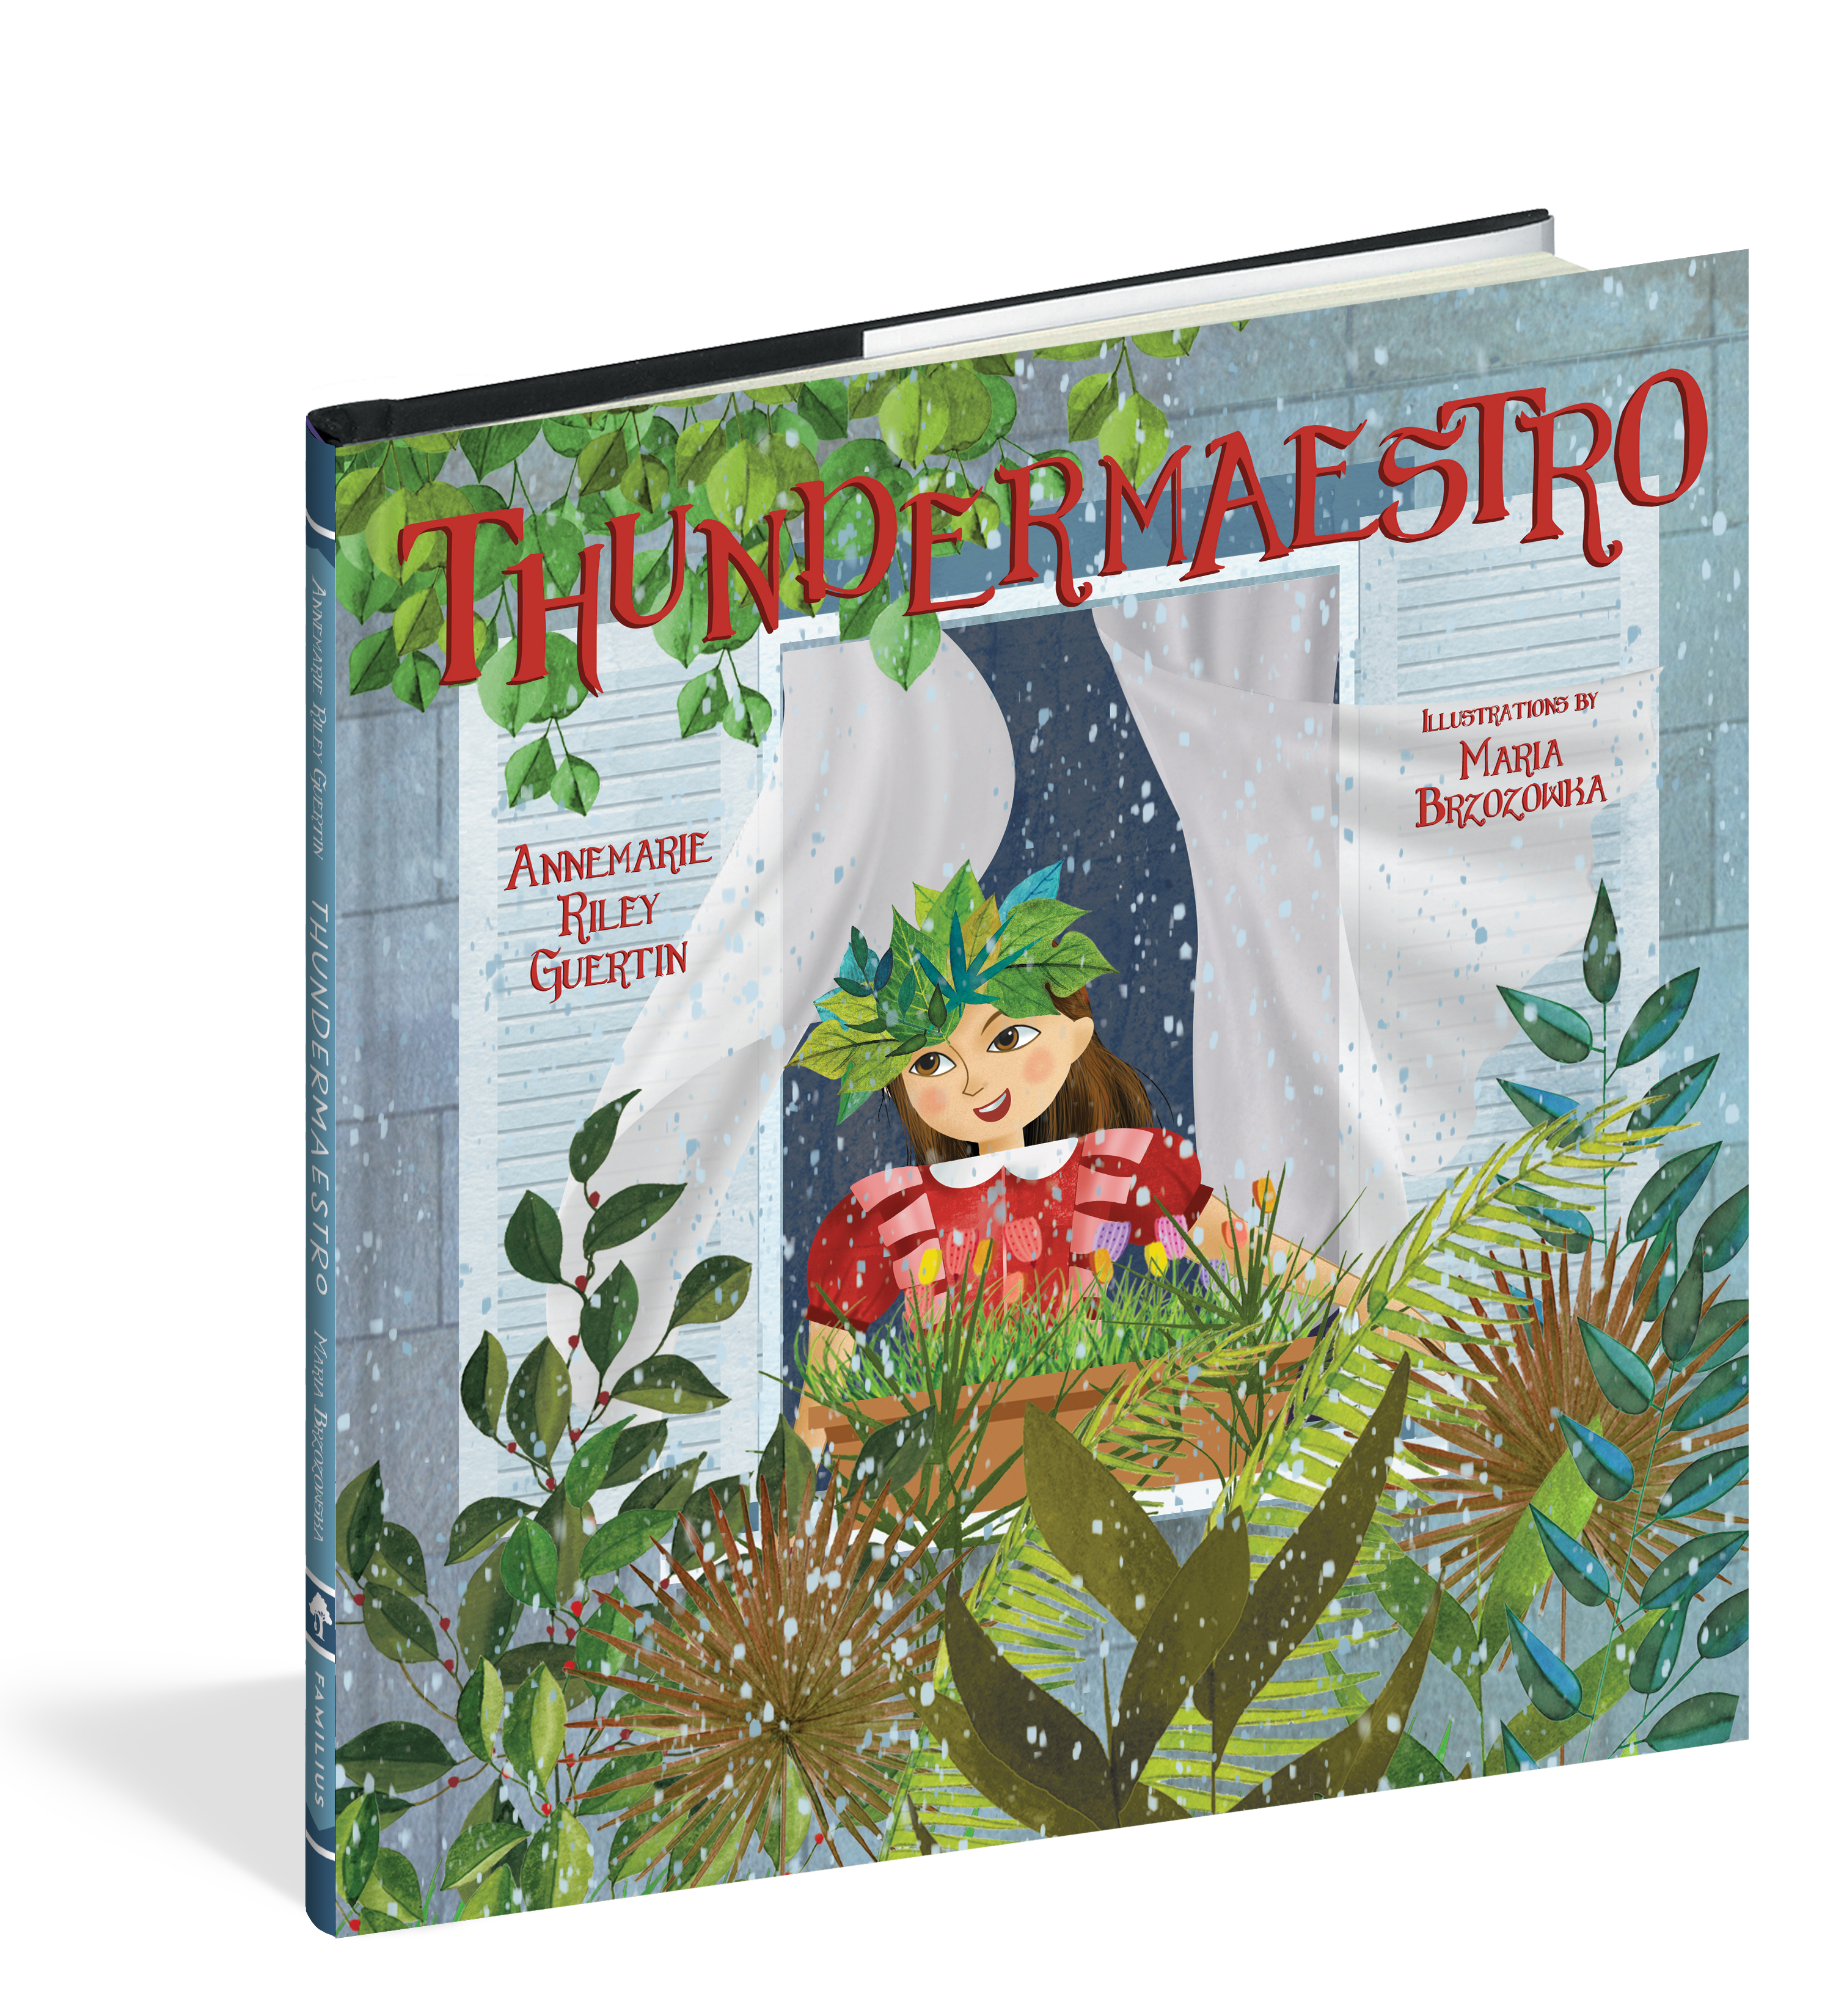 The cover of the picture book Thundermaestro.